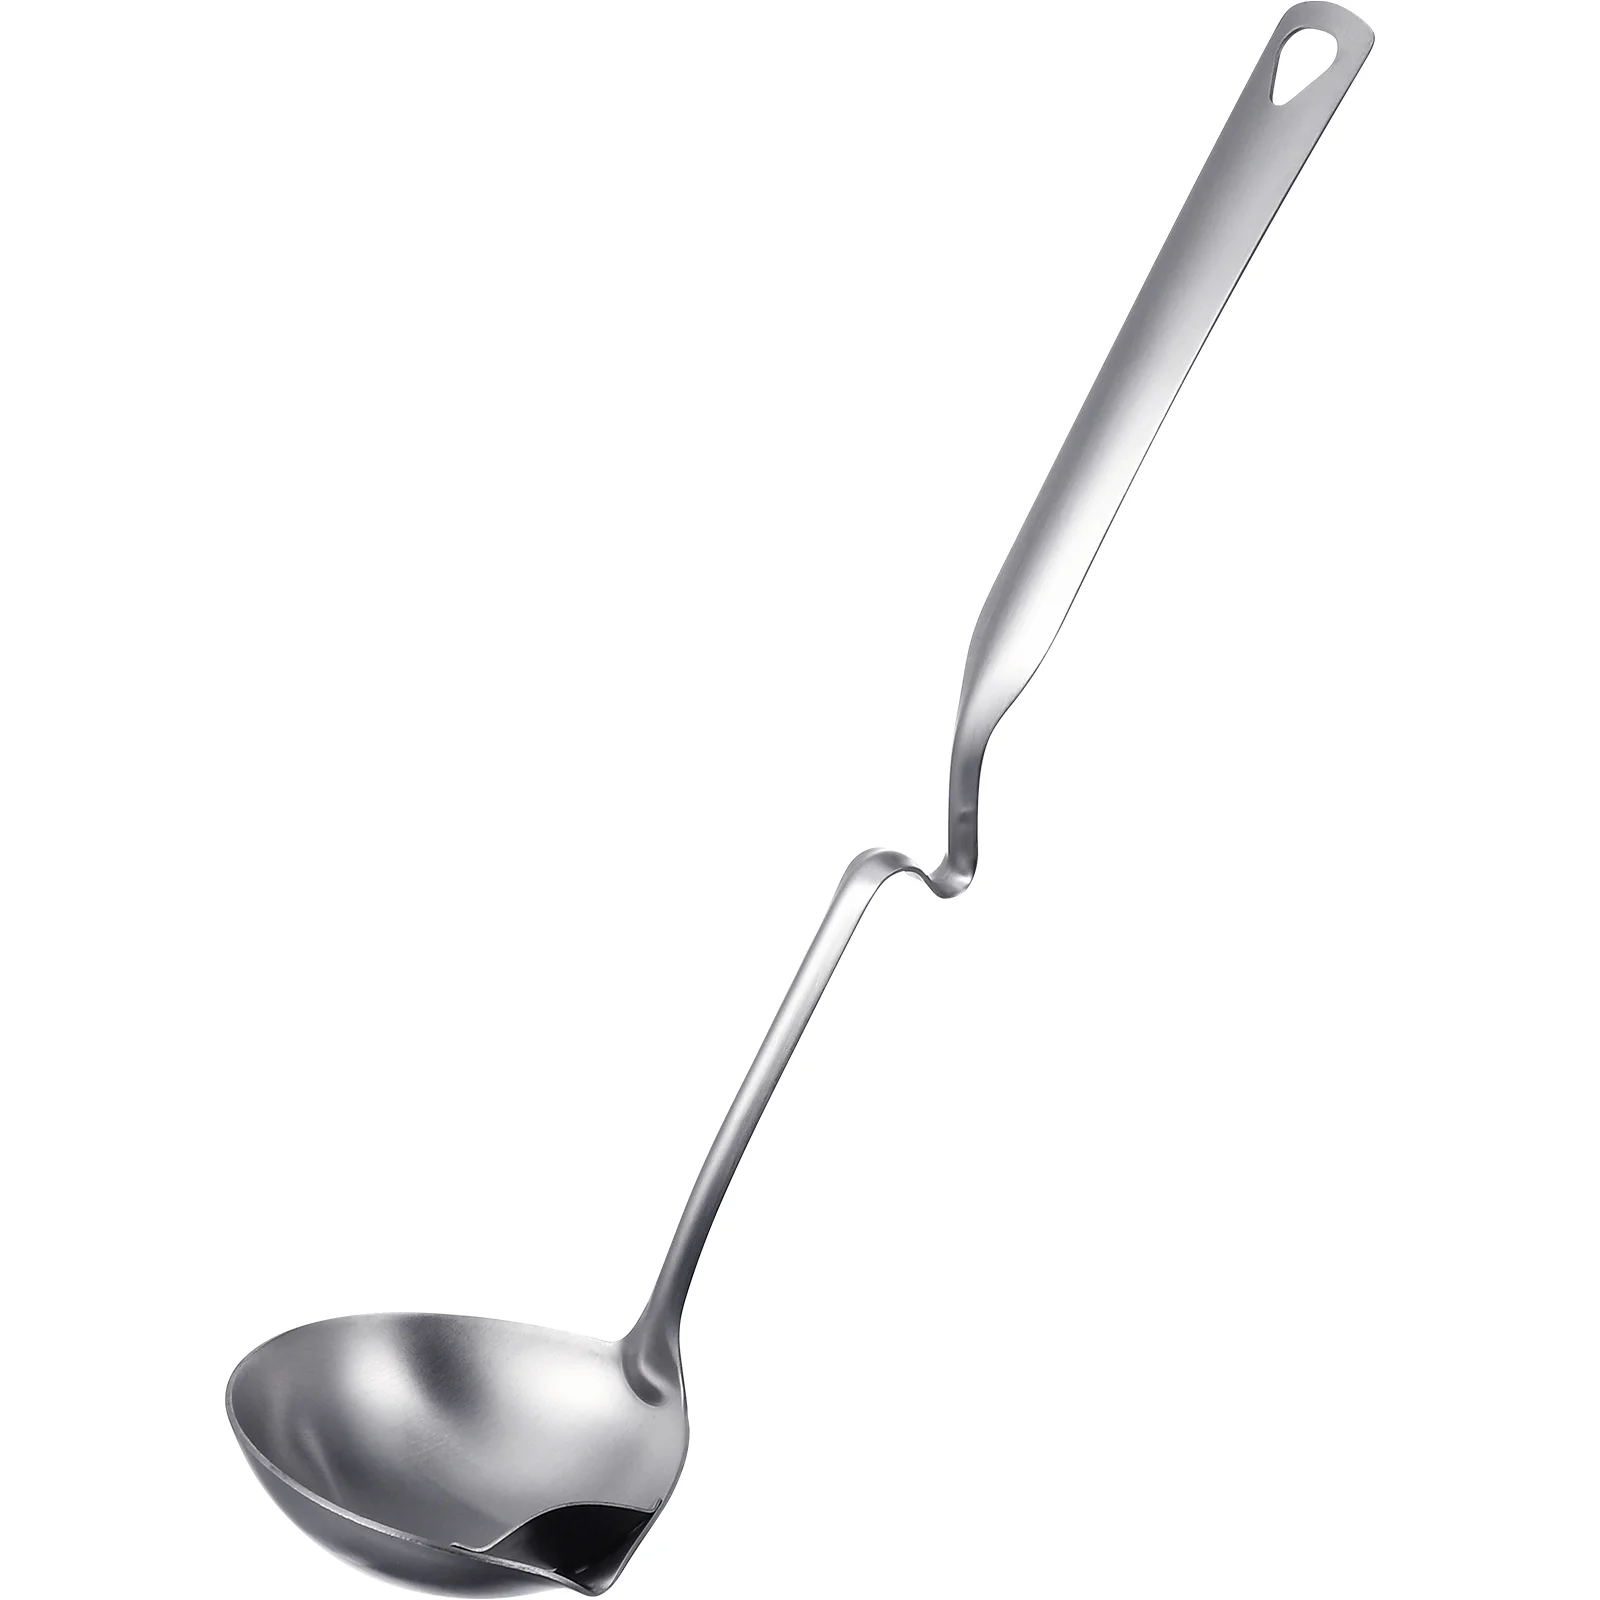 

Separator Fat Spoon Ladle Oil Skimmer Gravy Cooking Soup Strainer Food Stainless Steel Grease Spoons Punch Tool Ladles Bowl